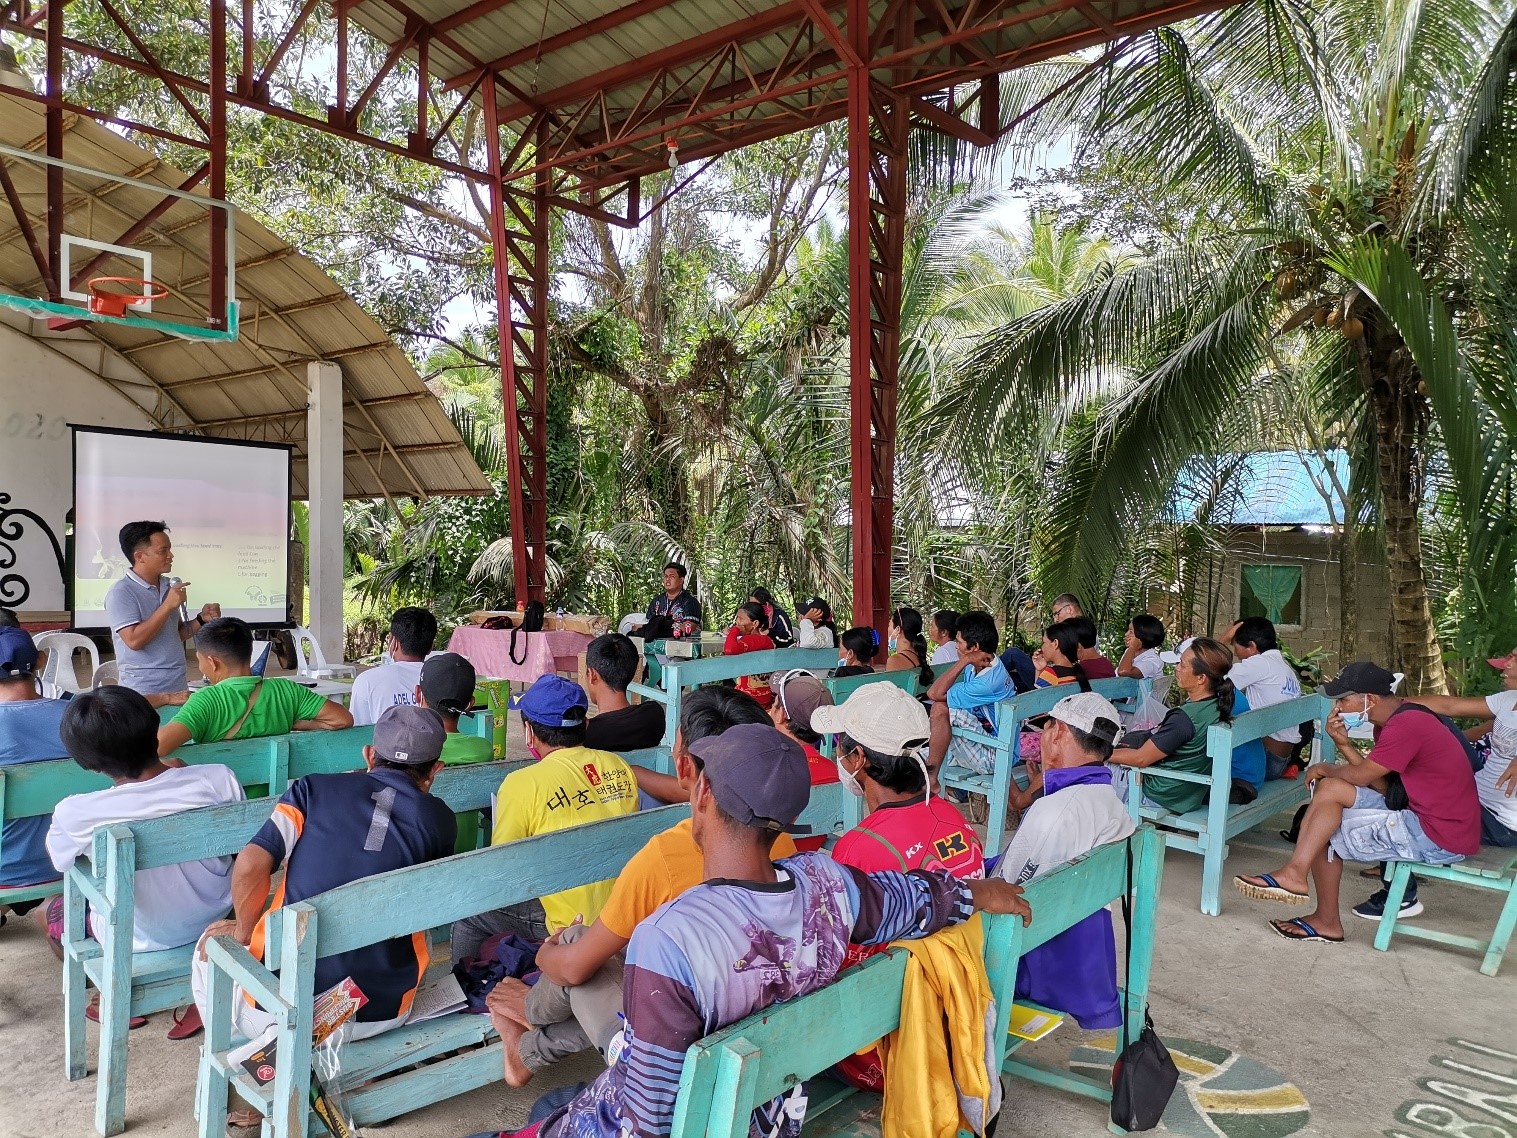 28 rice farmers trained on postharvest and marketing systems